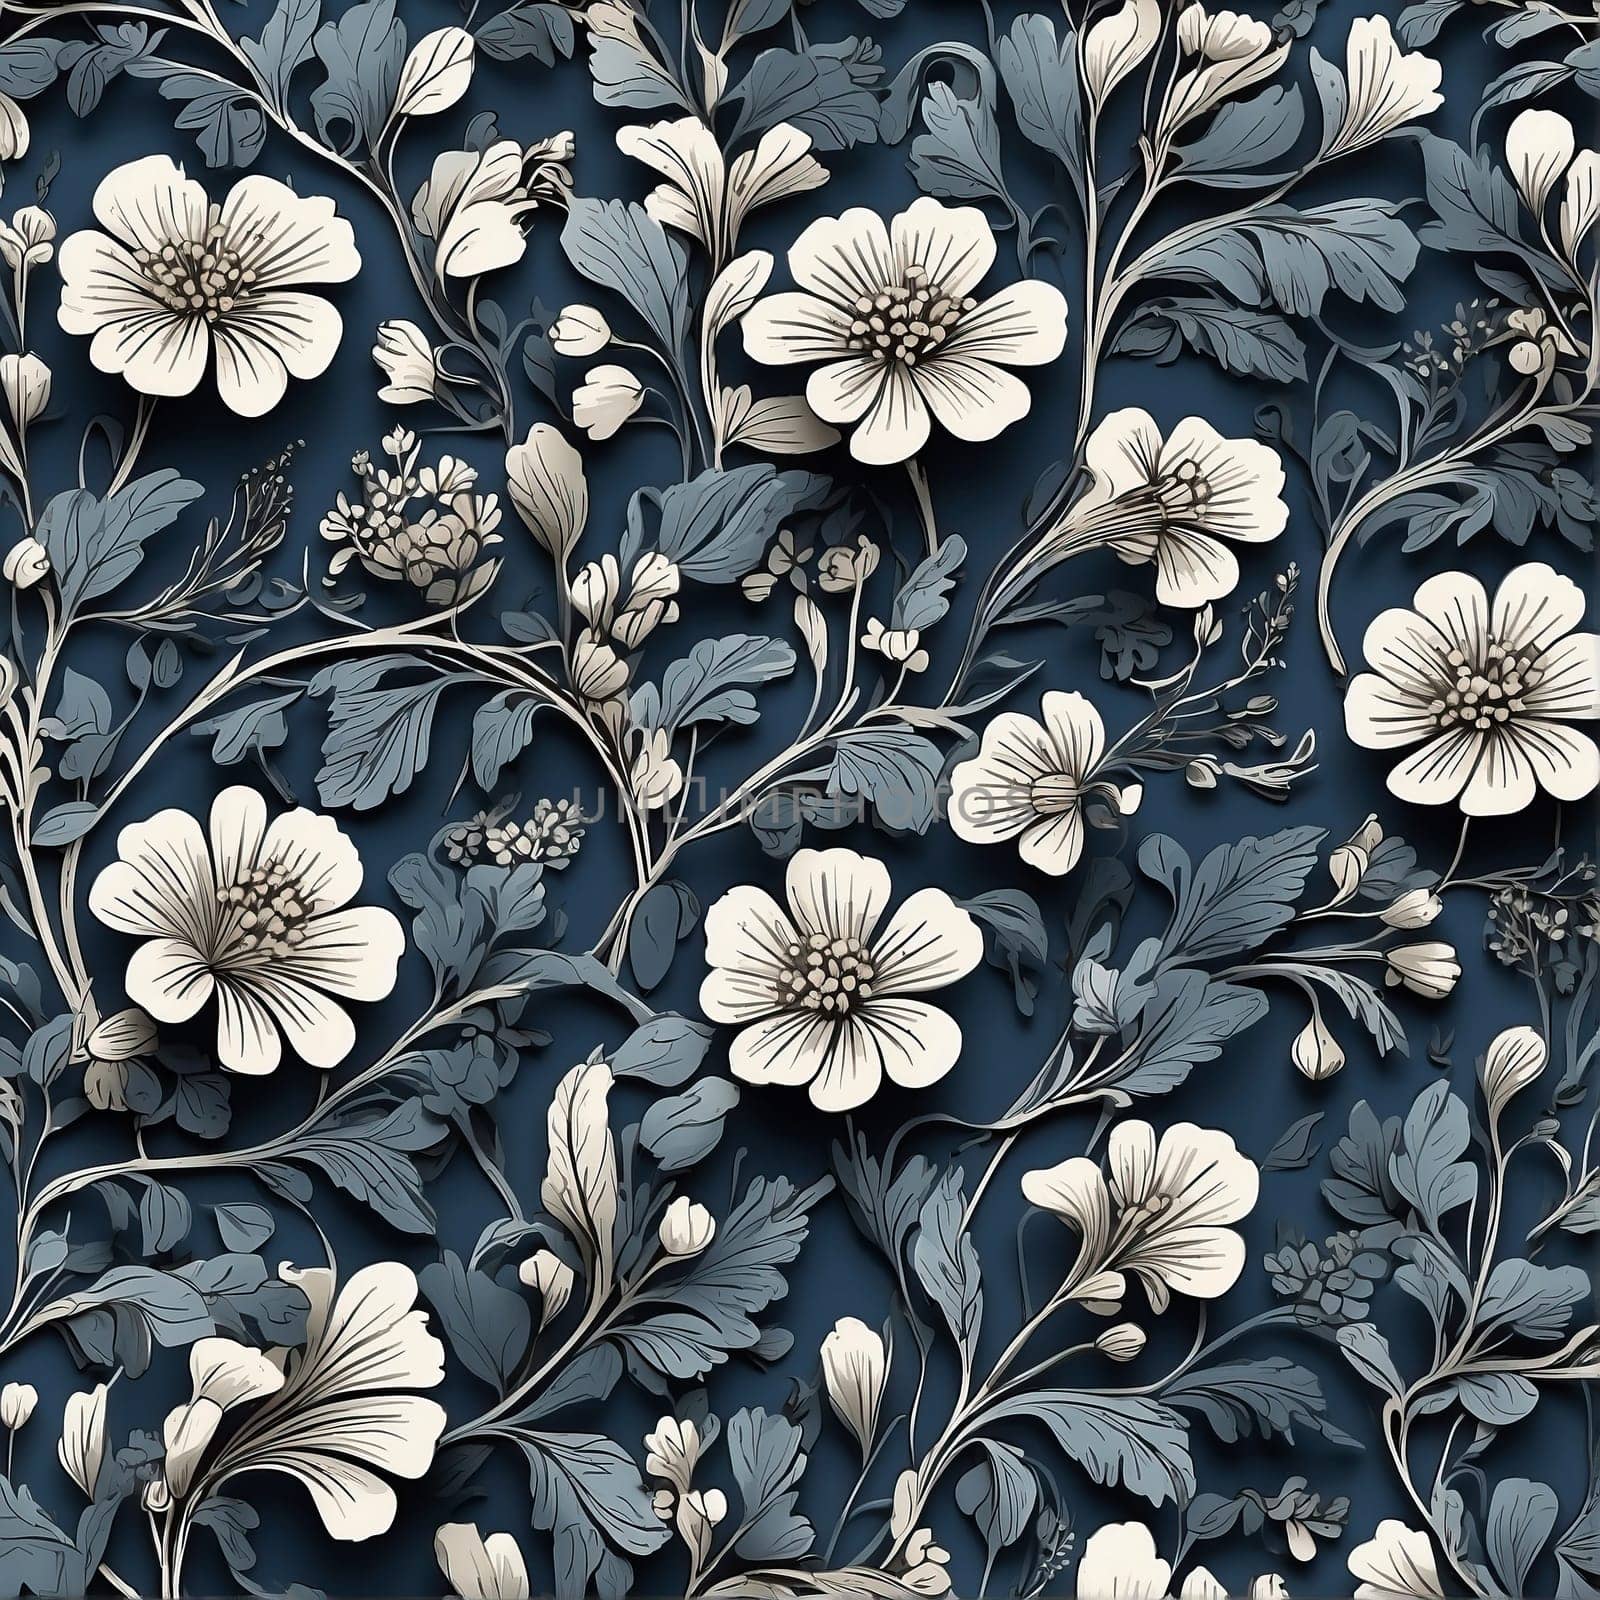 Floral ornament on blue background by applesstock